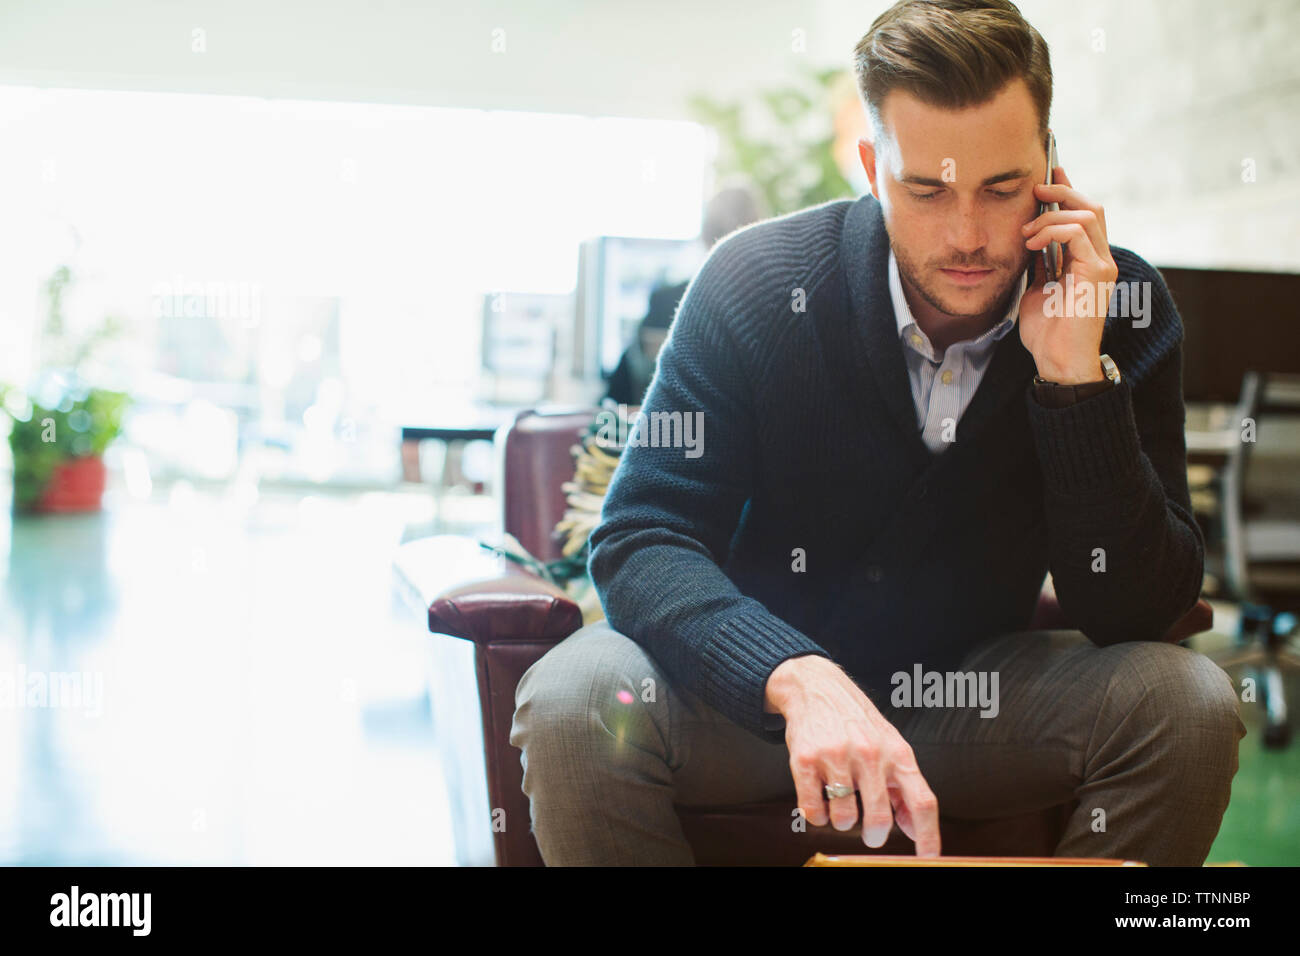 Businessman talking on mobile phone while sitting on chair in office Stock Photo